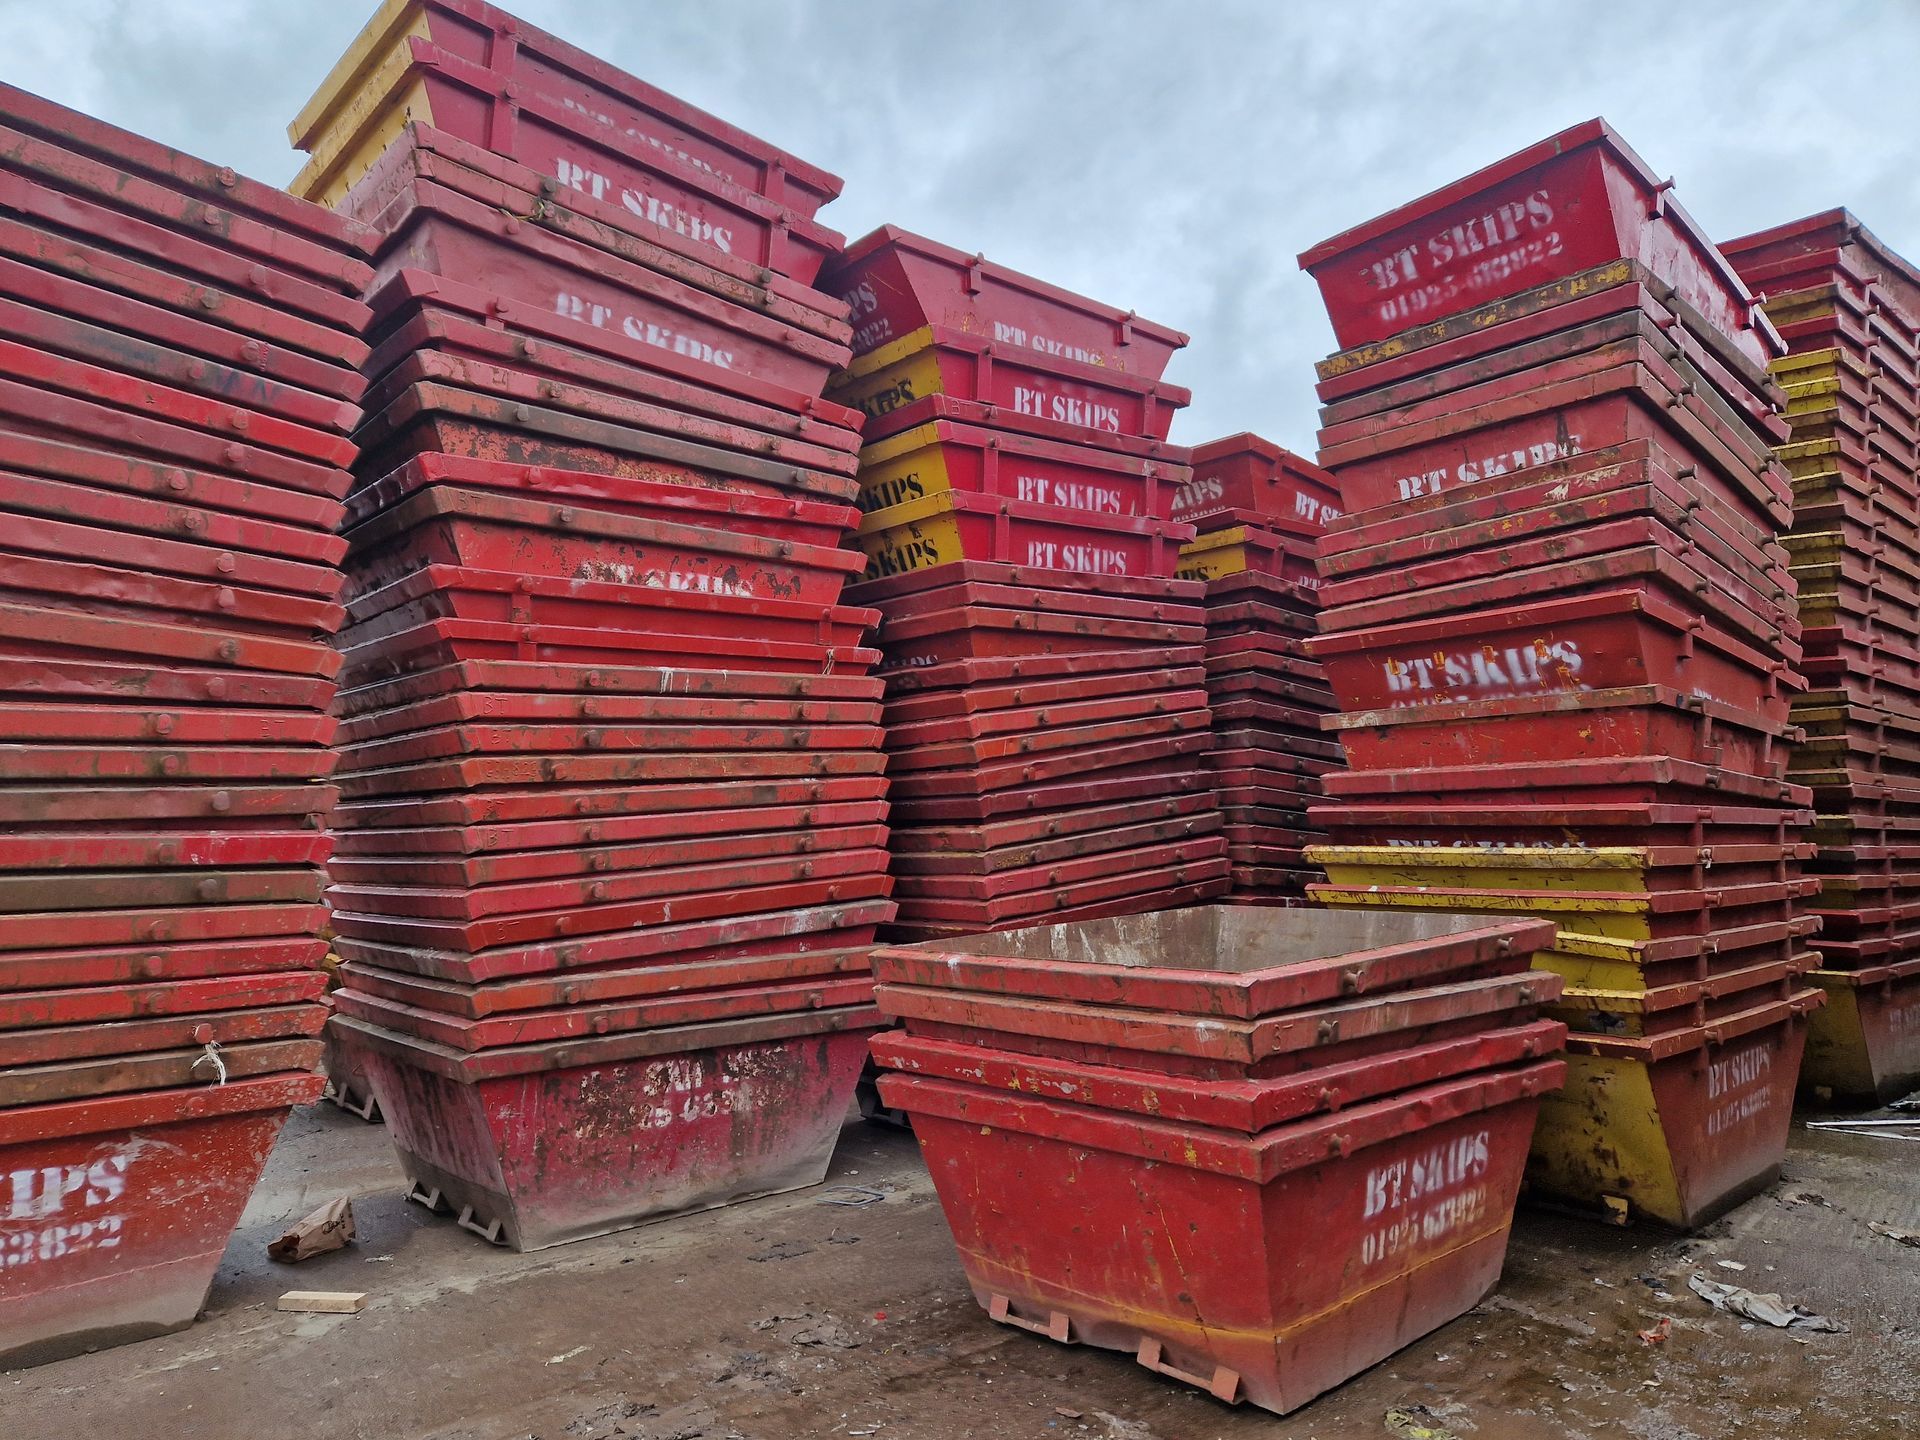 A pile of red and yellow dumpsters are stacked on top of each other.